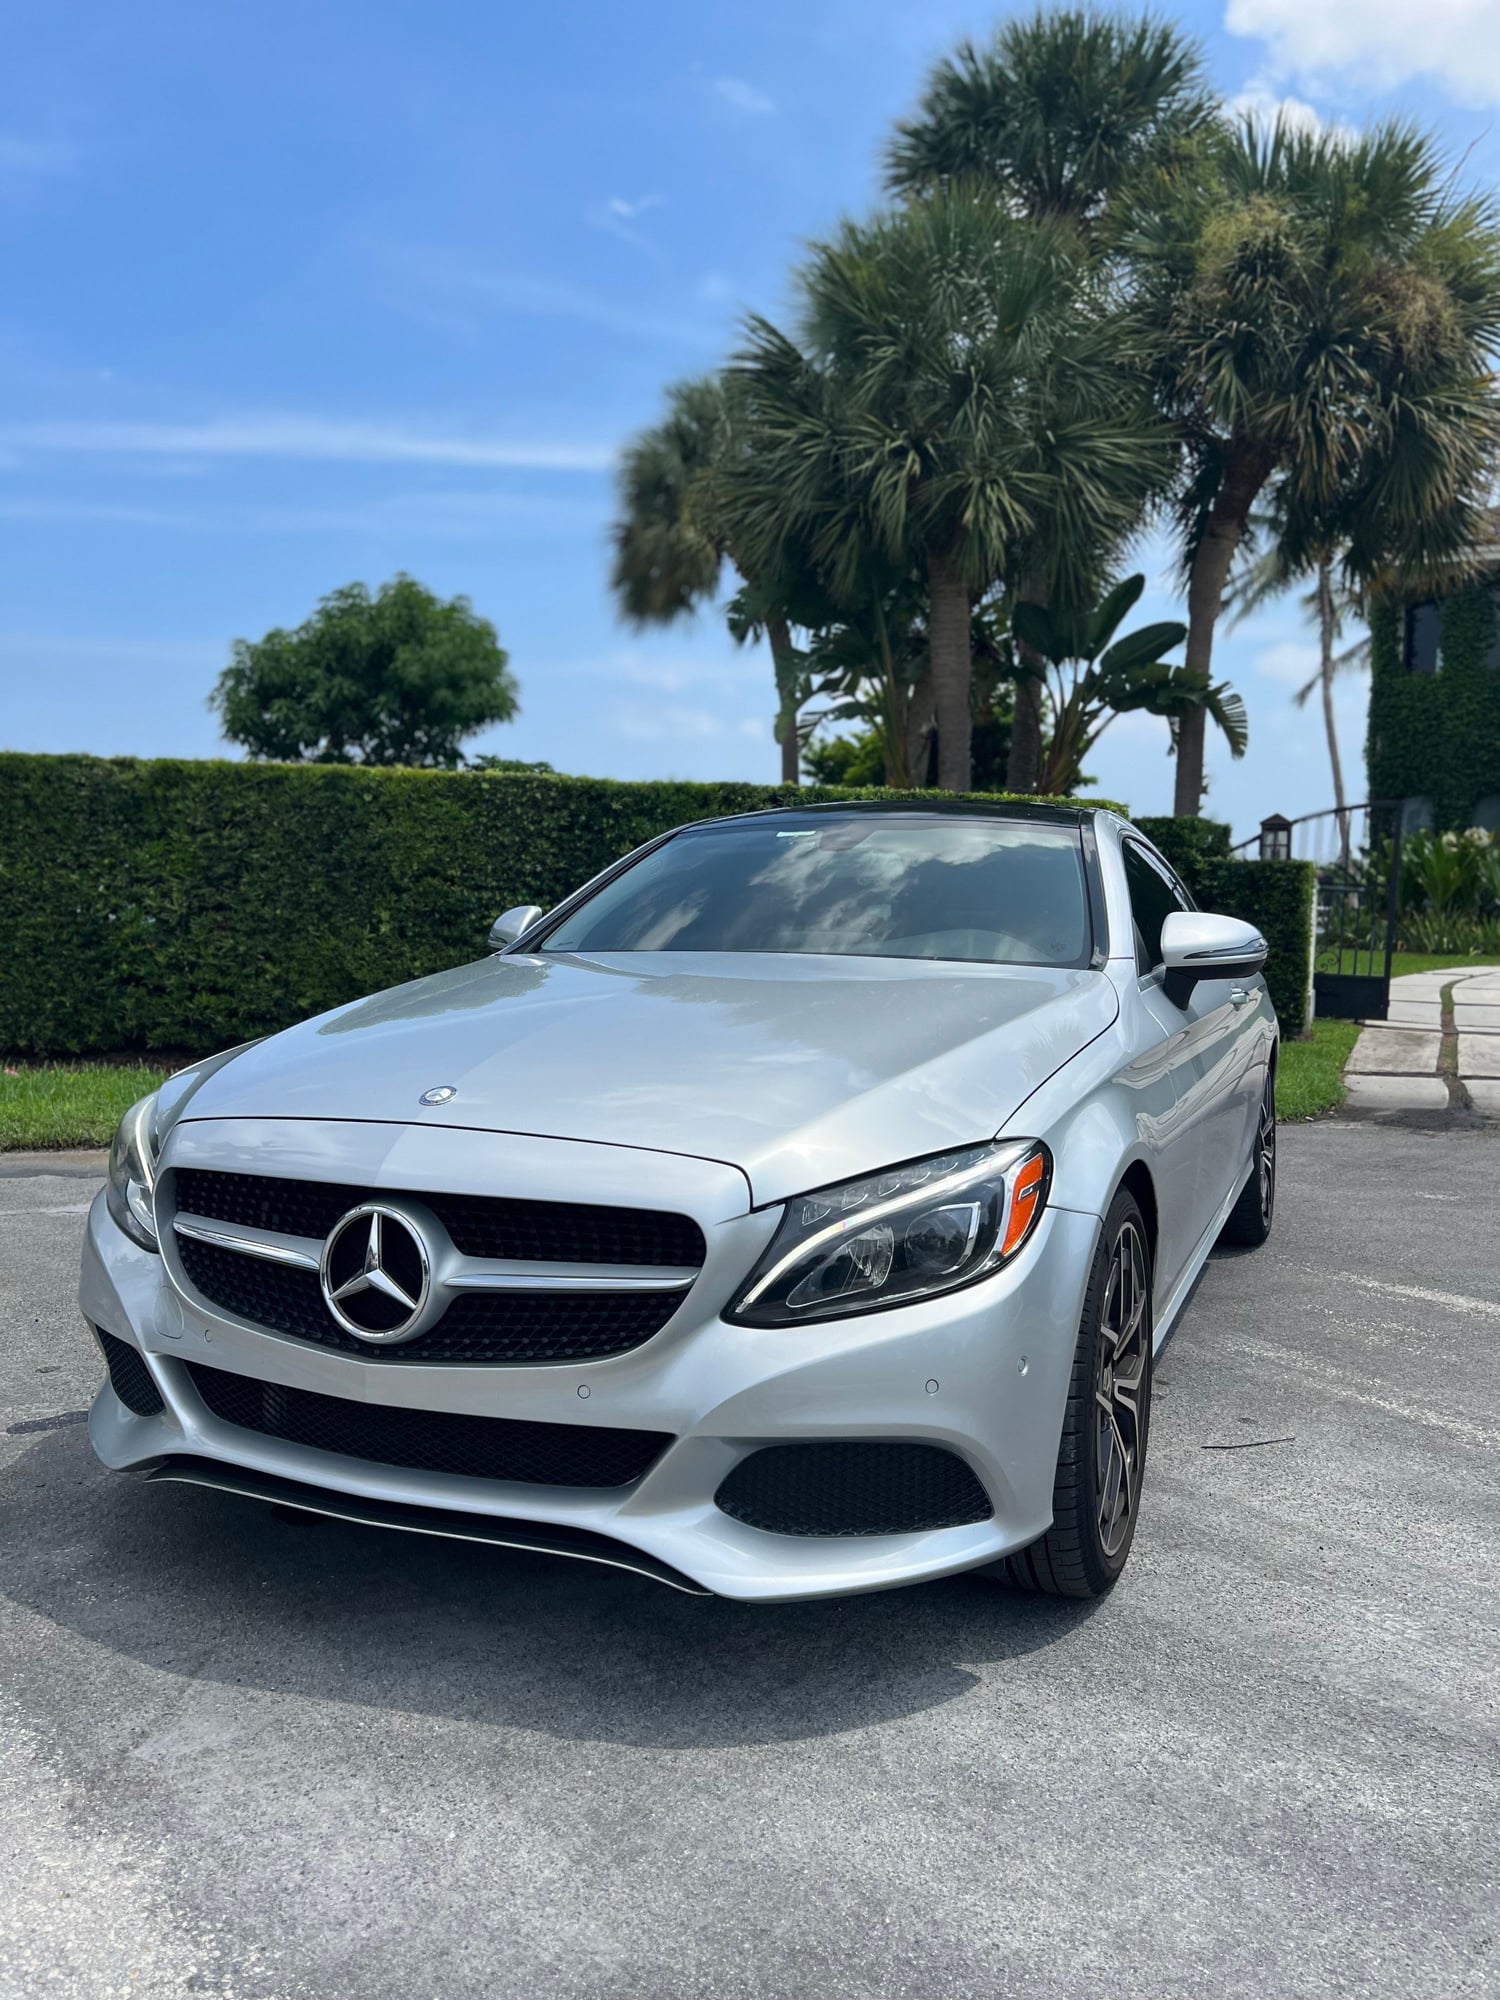 2017 Mercedes-Benz C300 - 2017 C300 Coupe 4Matic In SoFLo - Used - VIN WDDWJ4KB4HF36444 - 40,586 Miles - 4 cyl - AWD - Automatic - Coupe - Silver - Hallandale Beach, FL 33009, United States